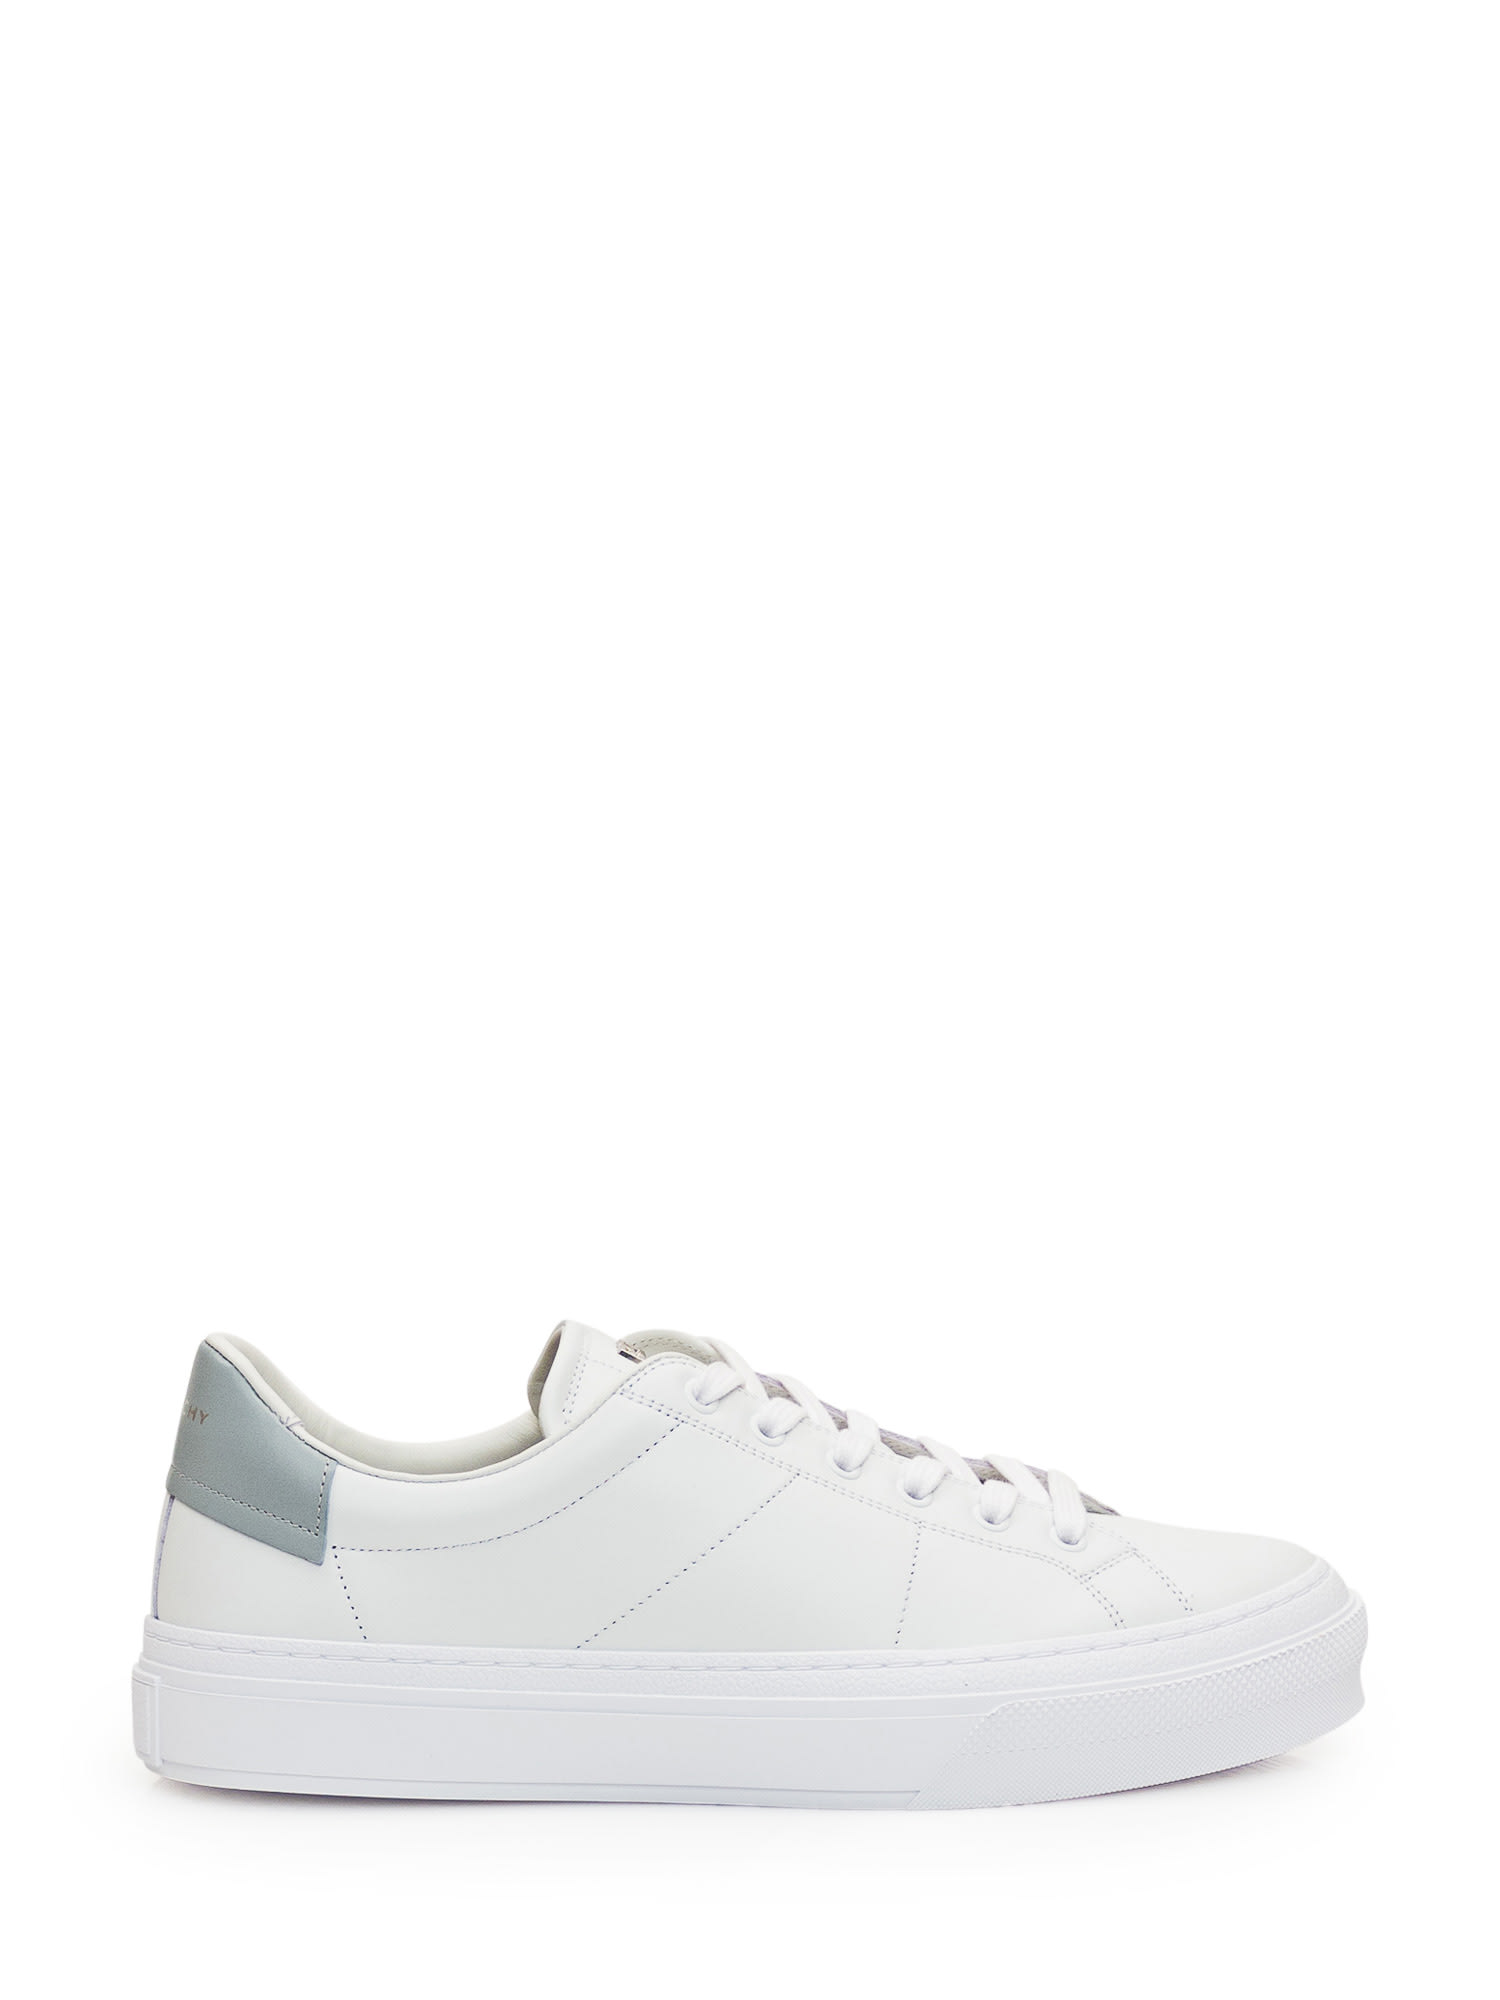 Givenchy City Sport Sneaker In White Grey